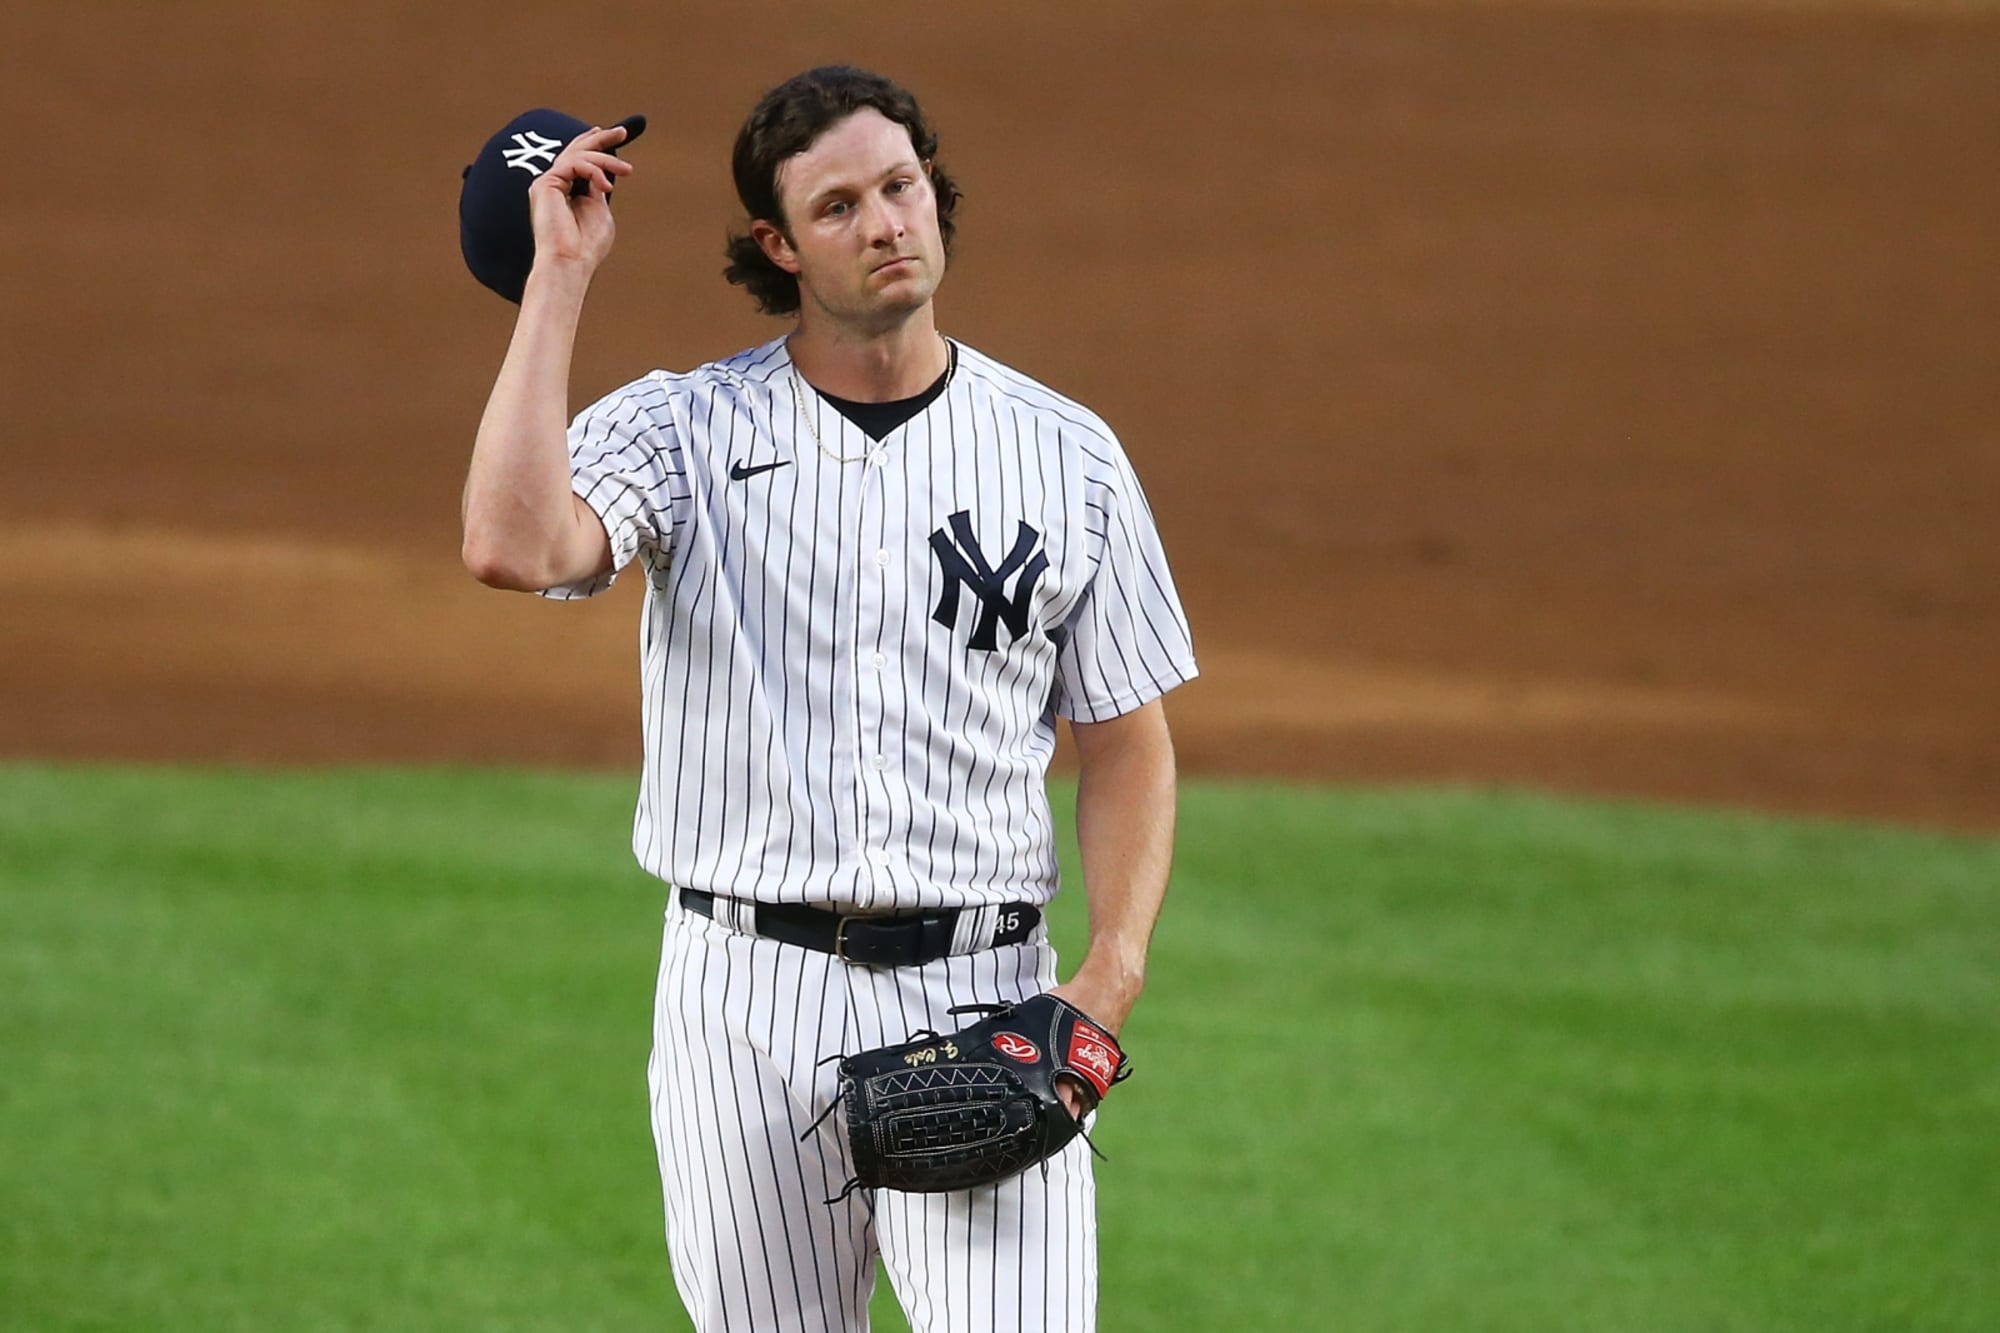 Near NO Hitter for Yankees Gerrit Cole